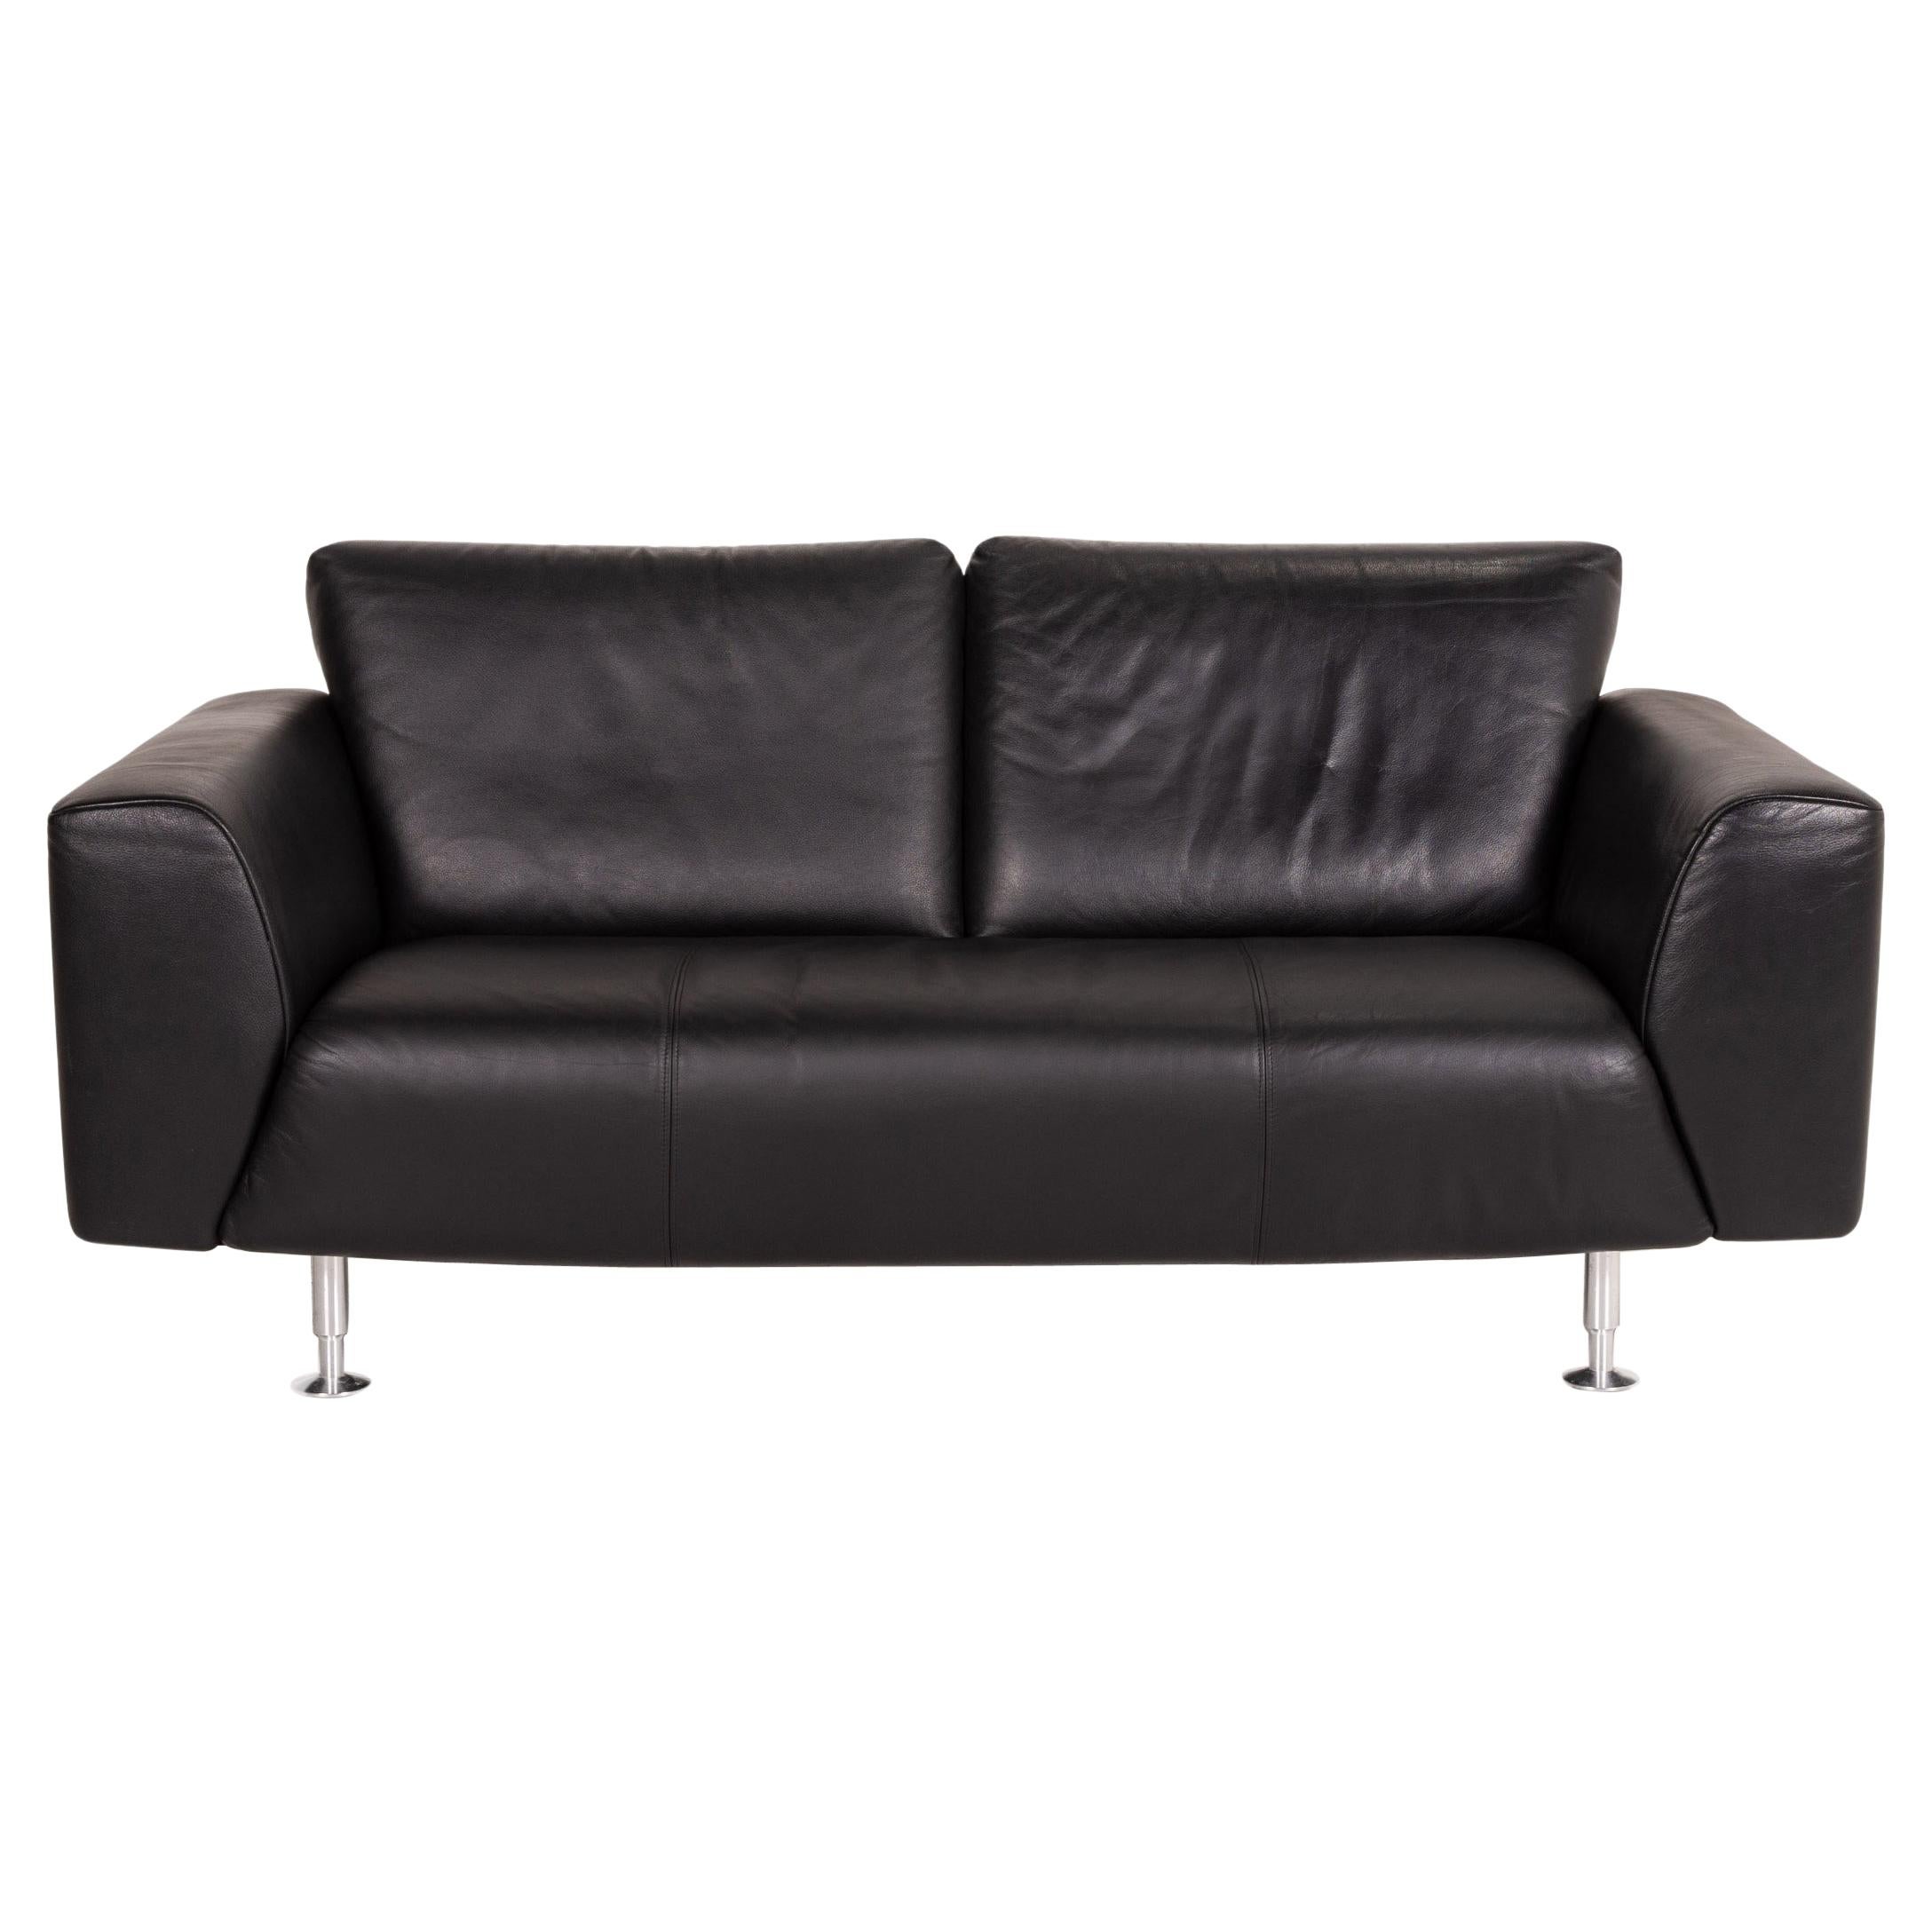 Rolf Benz Leather Sofa Black Two-Seater Couch